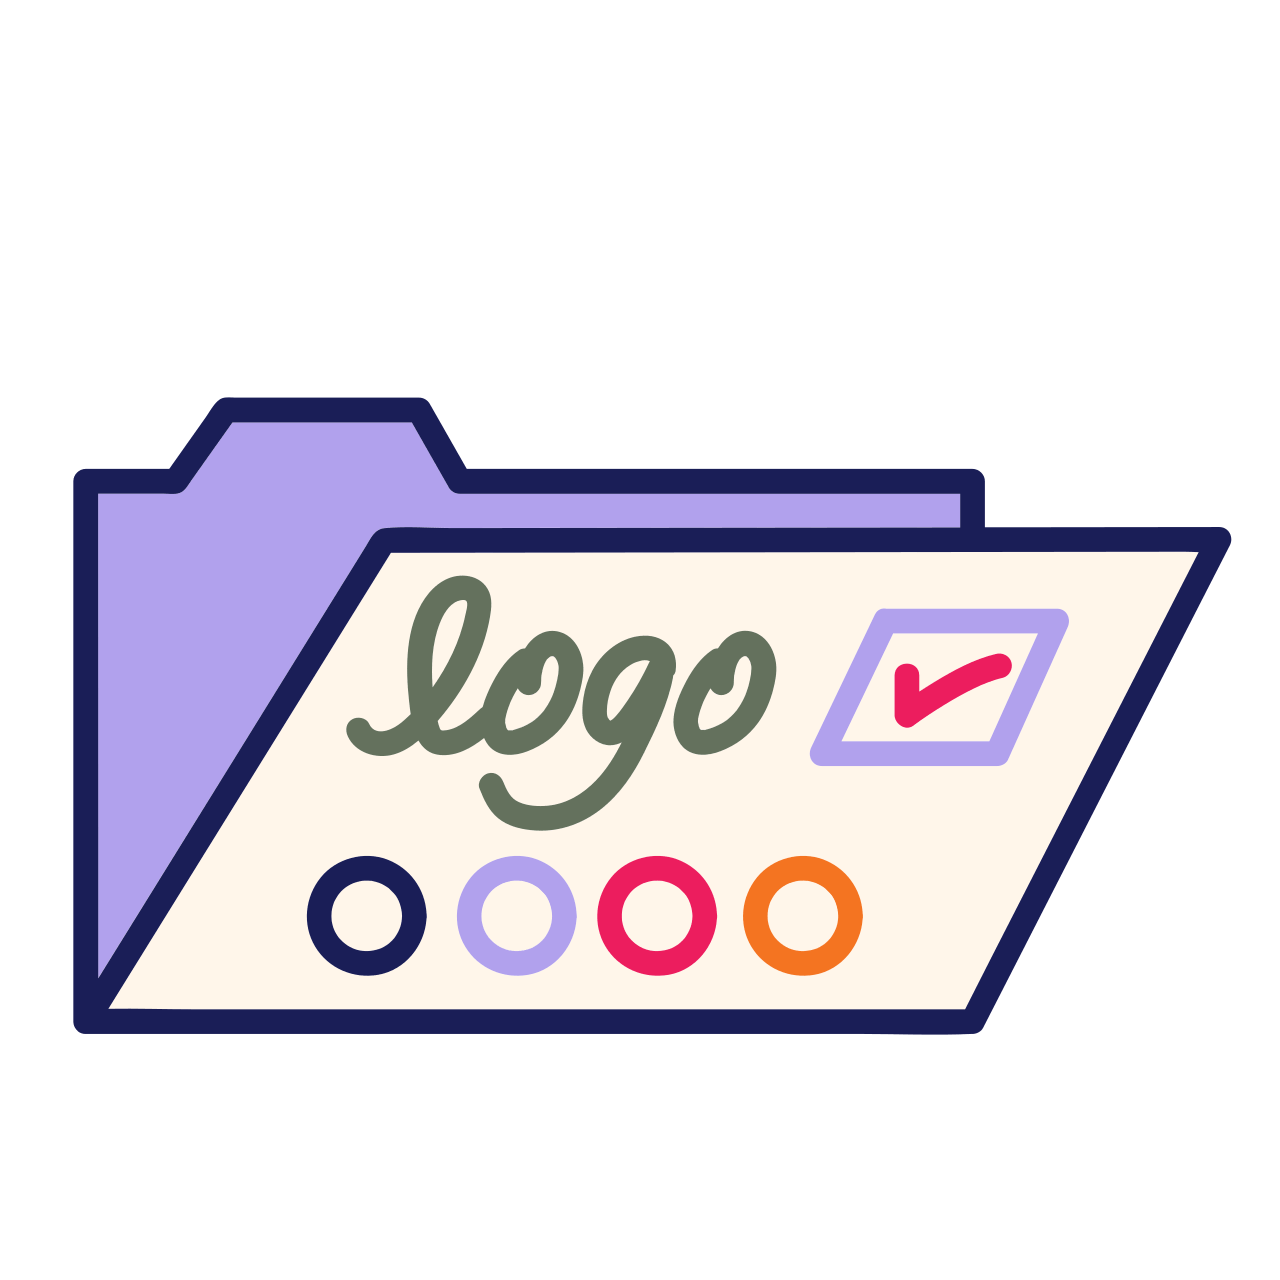 A manila folder that is open, the word "logo" is written on the front